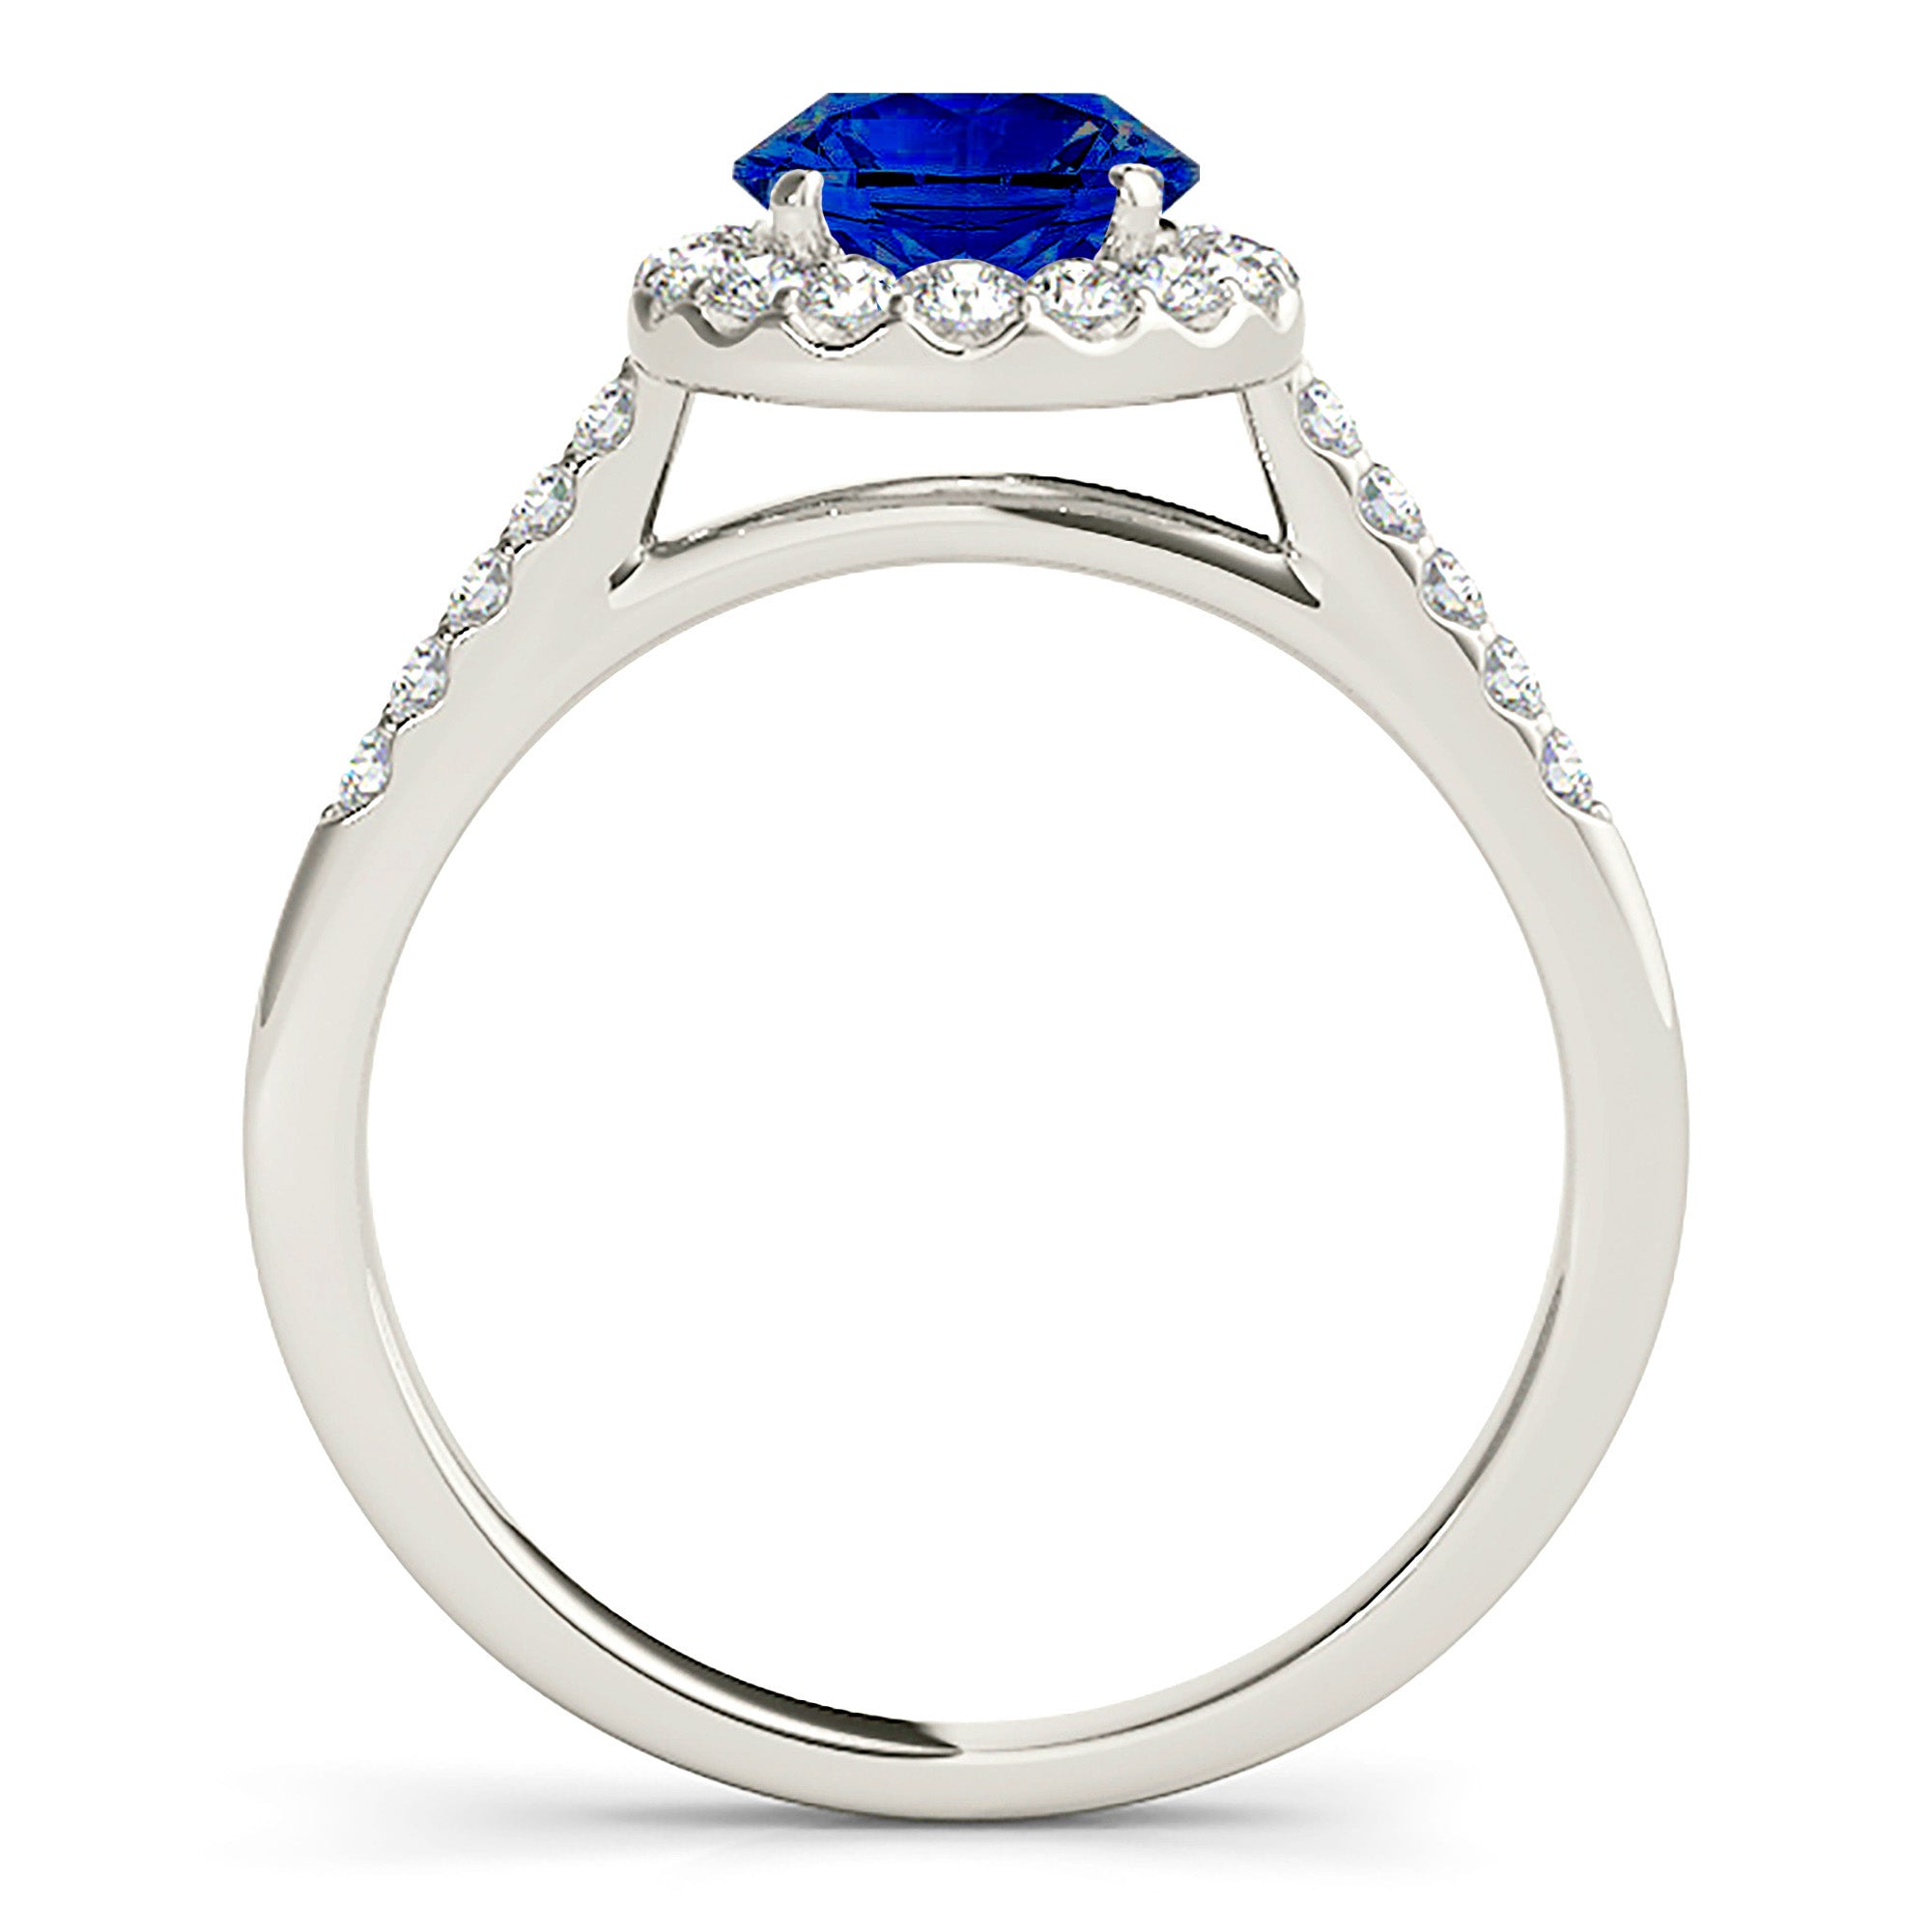 1.35 ct. Genuine Blue Sapphire Halo Ring With 0.40 ctw. Side Diamonds-in 14K/18K White, Yellow, Rose Gold and Platinum - Christmas Jewelry Gift -VIRABYANI